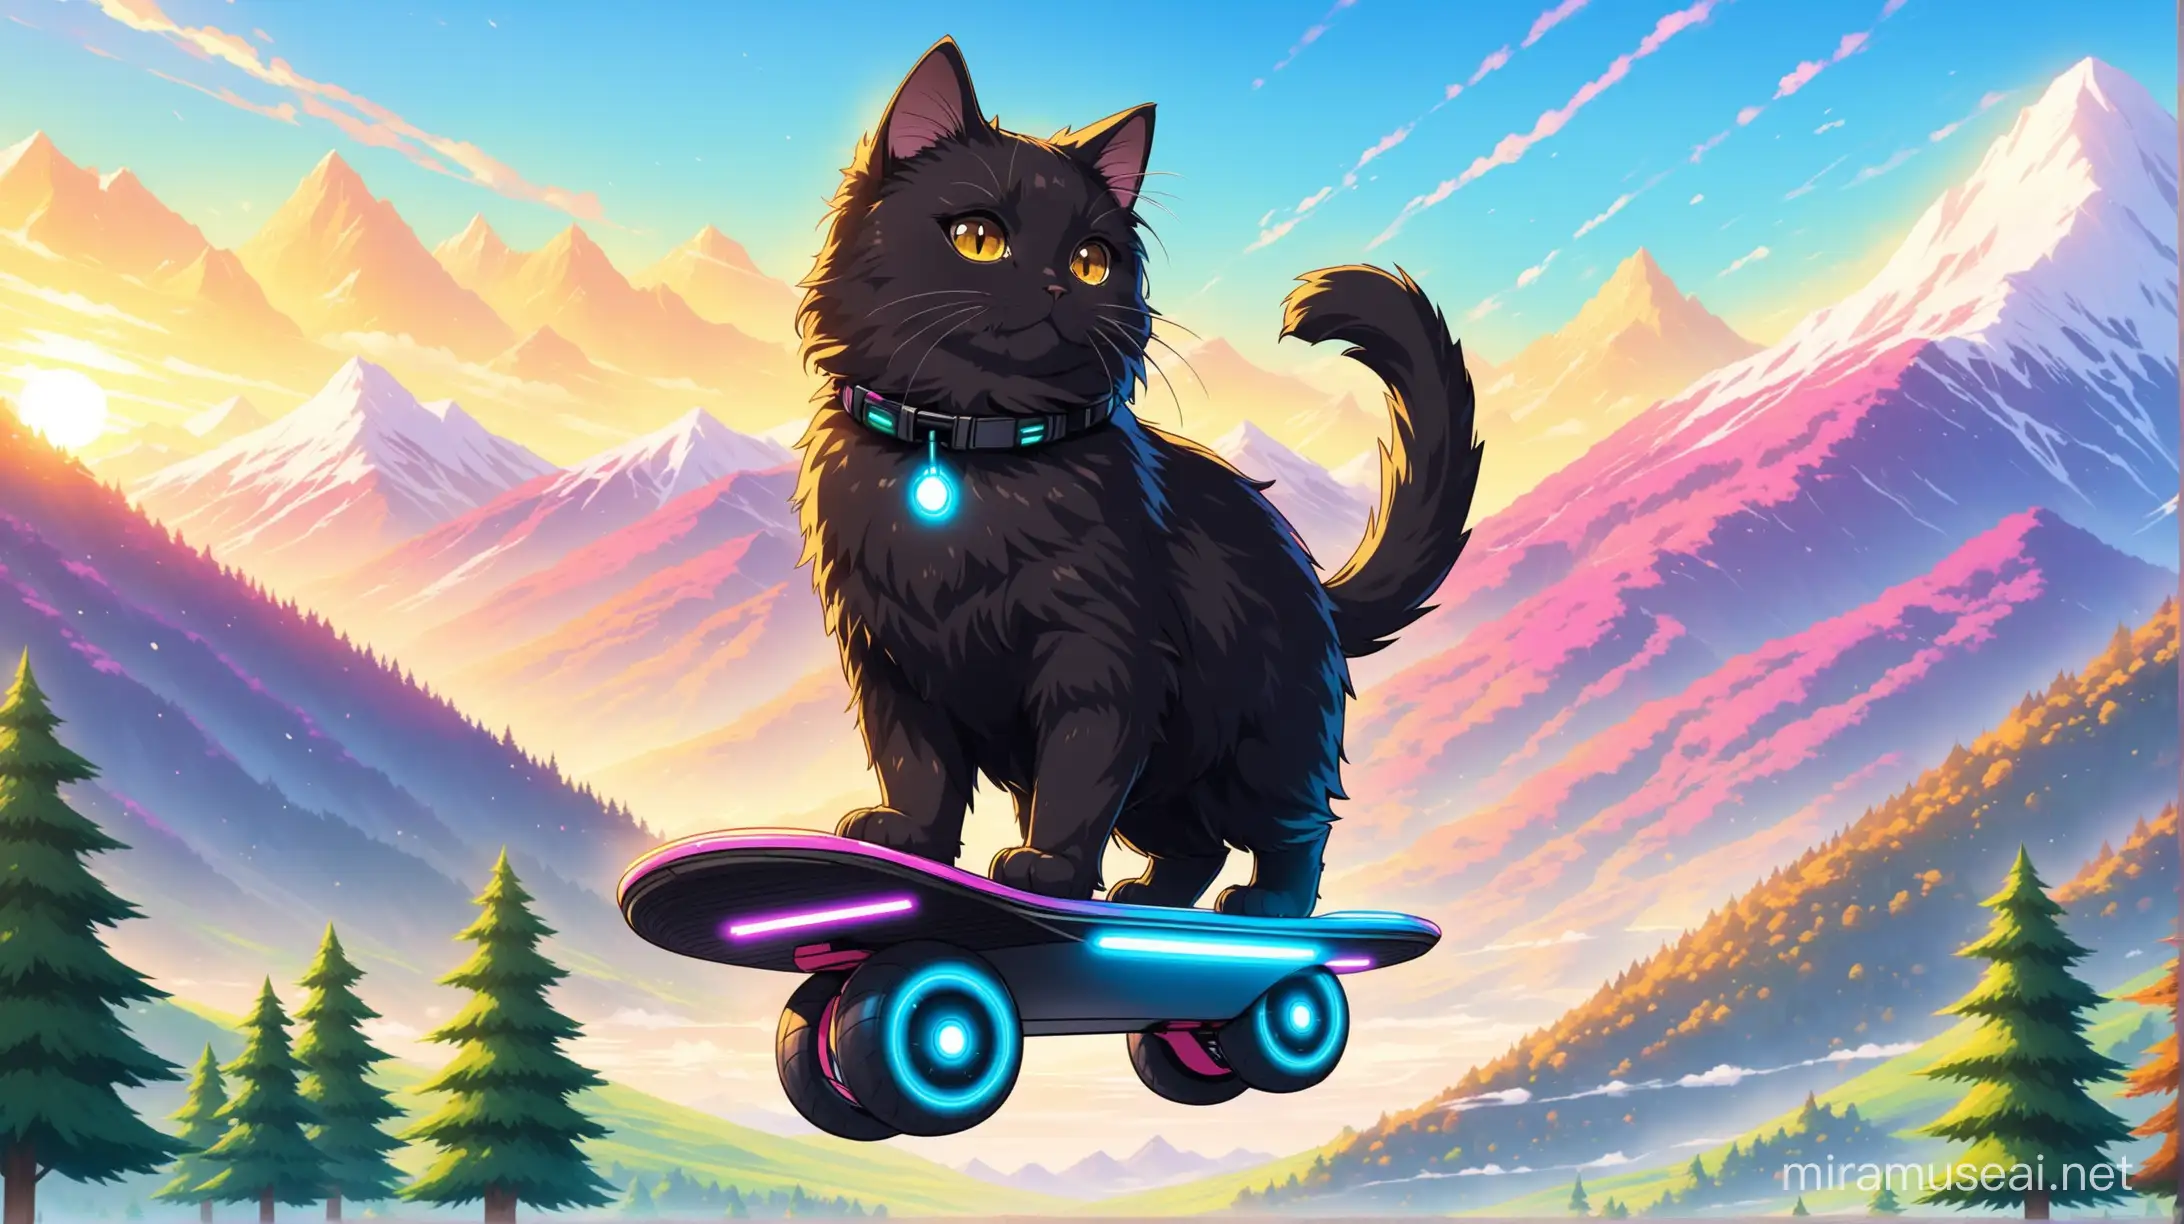 Fluffy Cat on Hoverboard Admiring Sugar Trees near Mountains